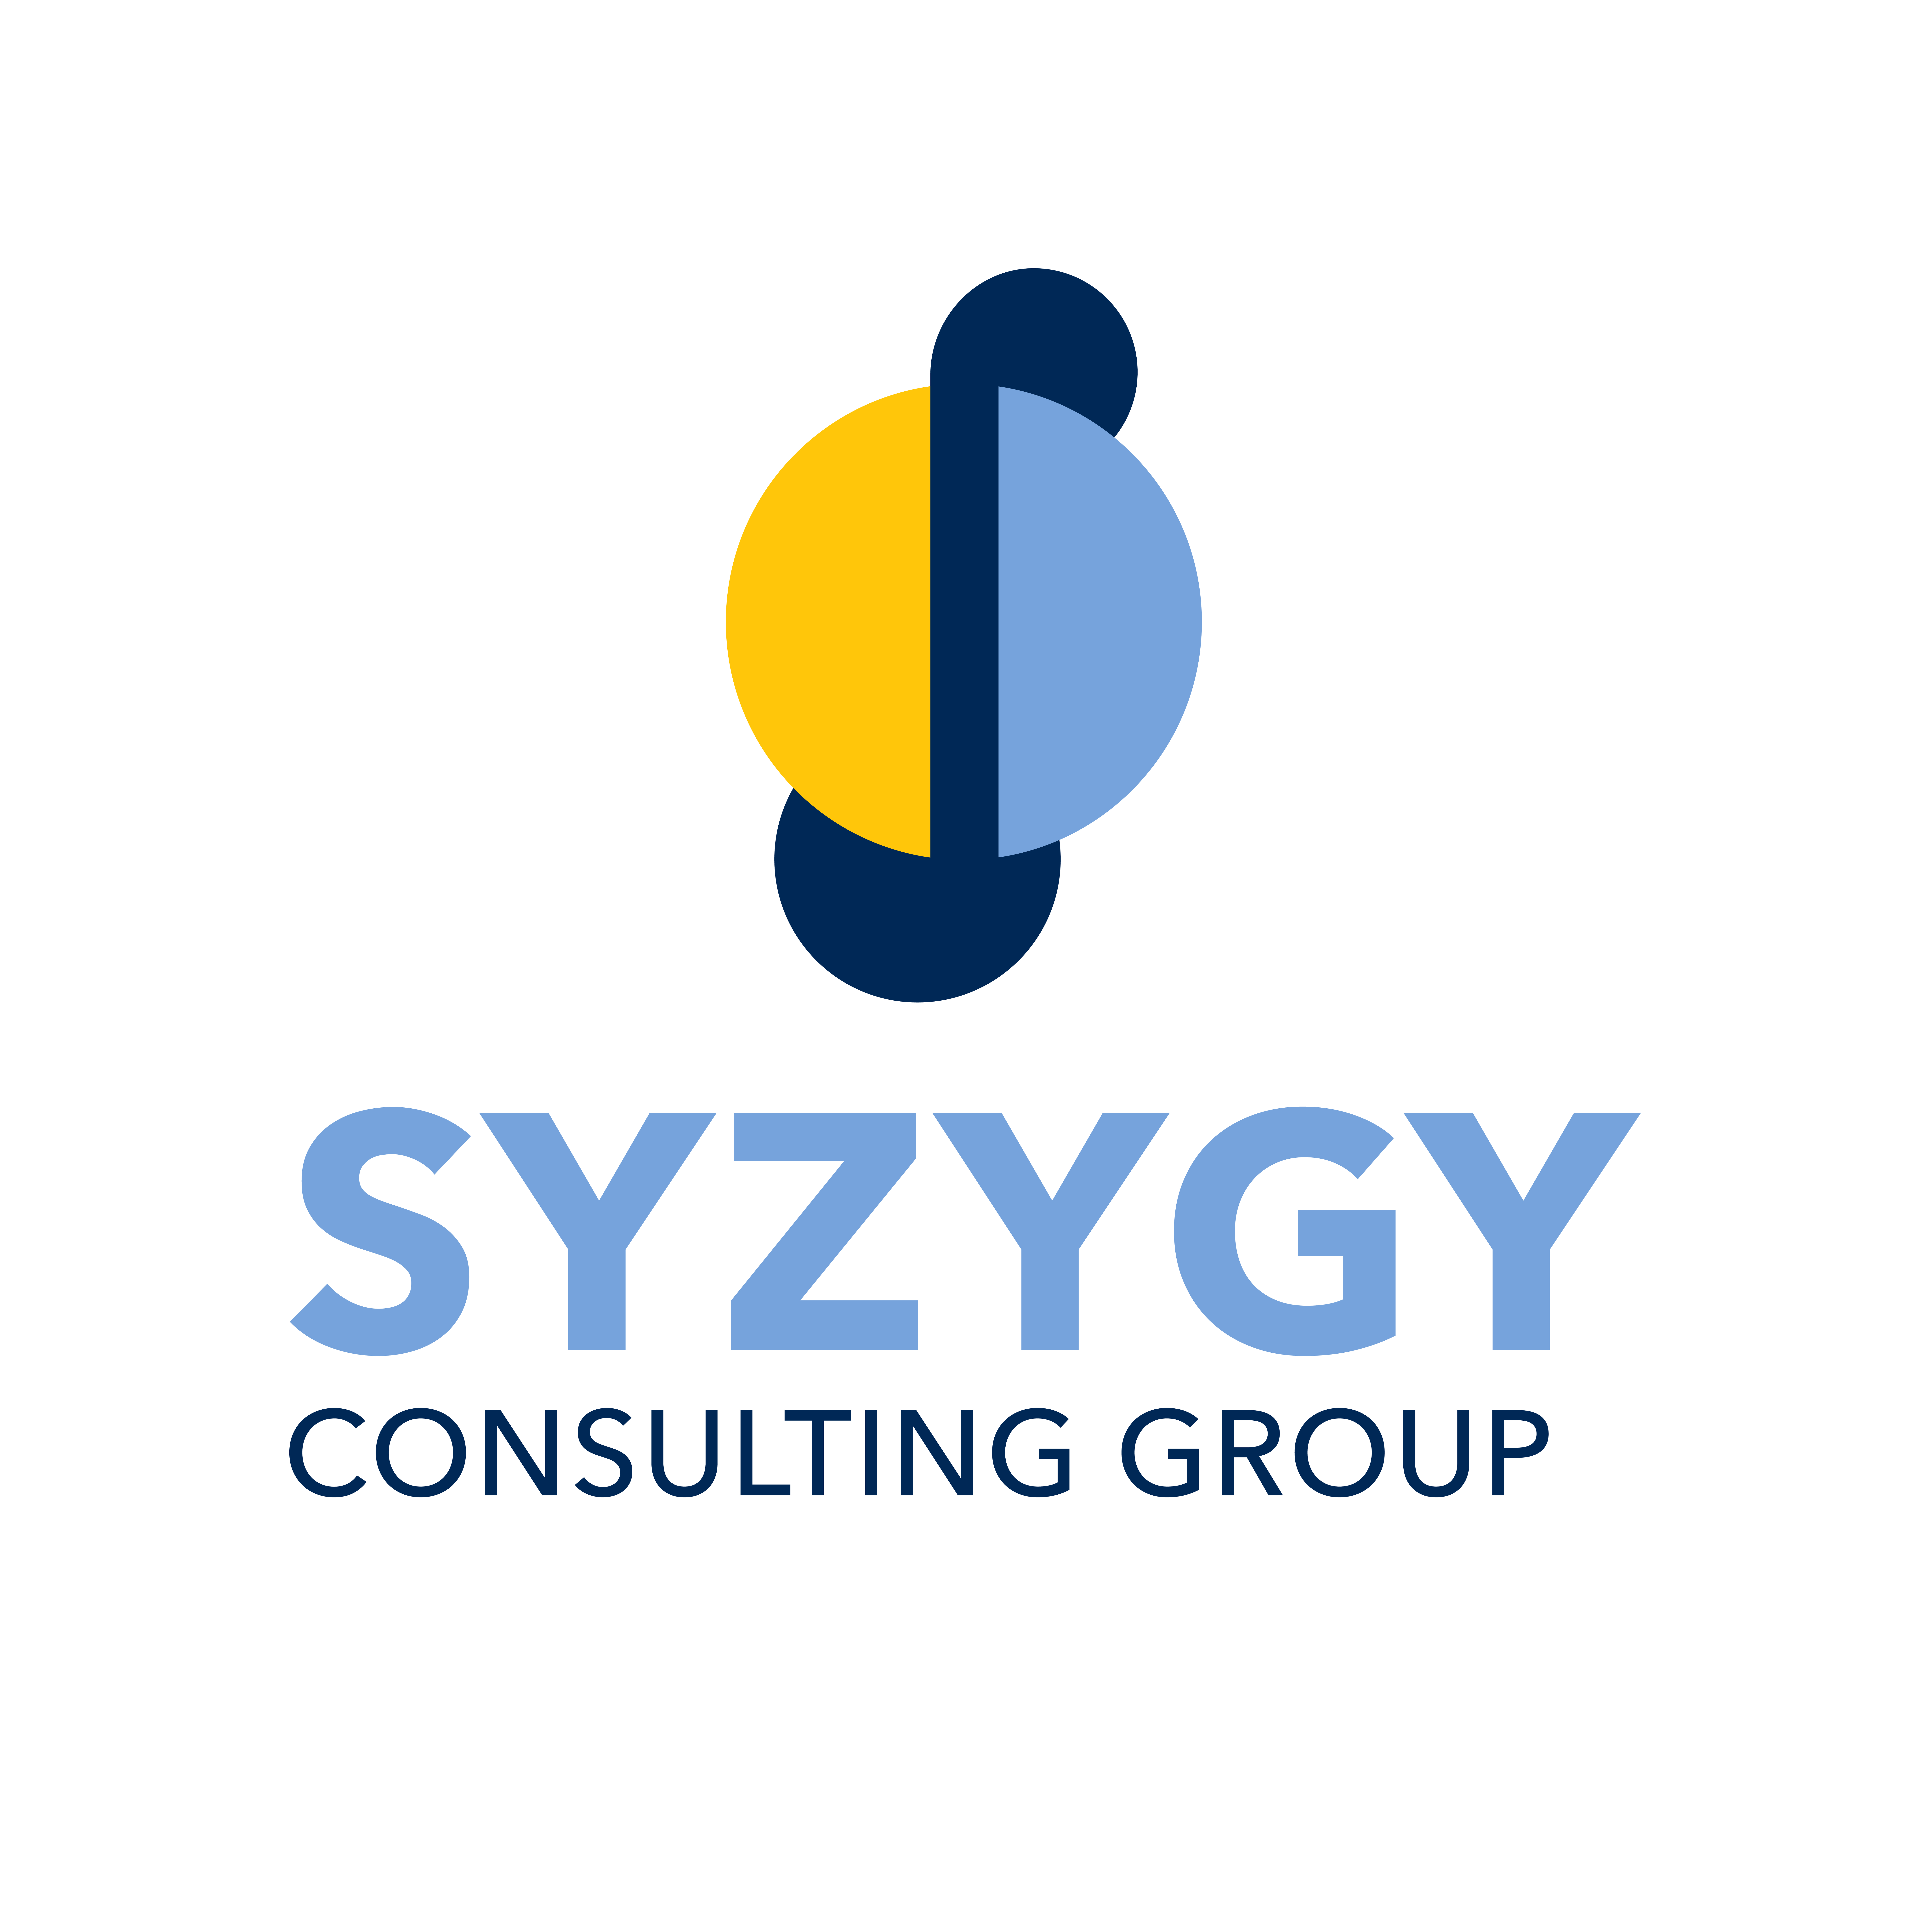 Foto de Syzygy Consulting Group Blacktown